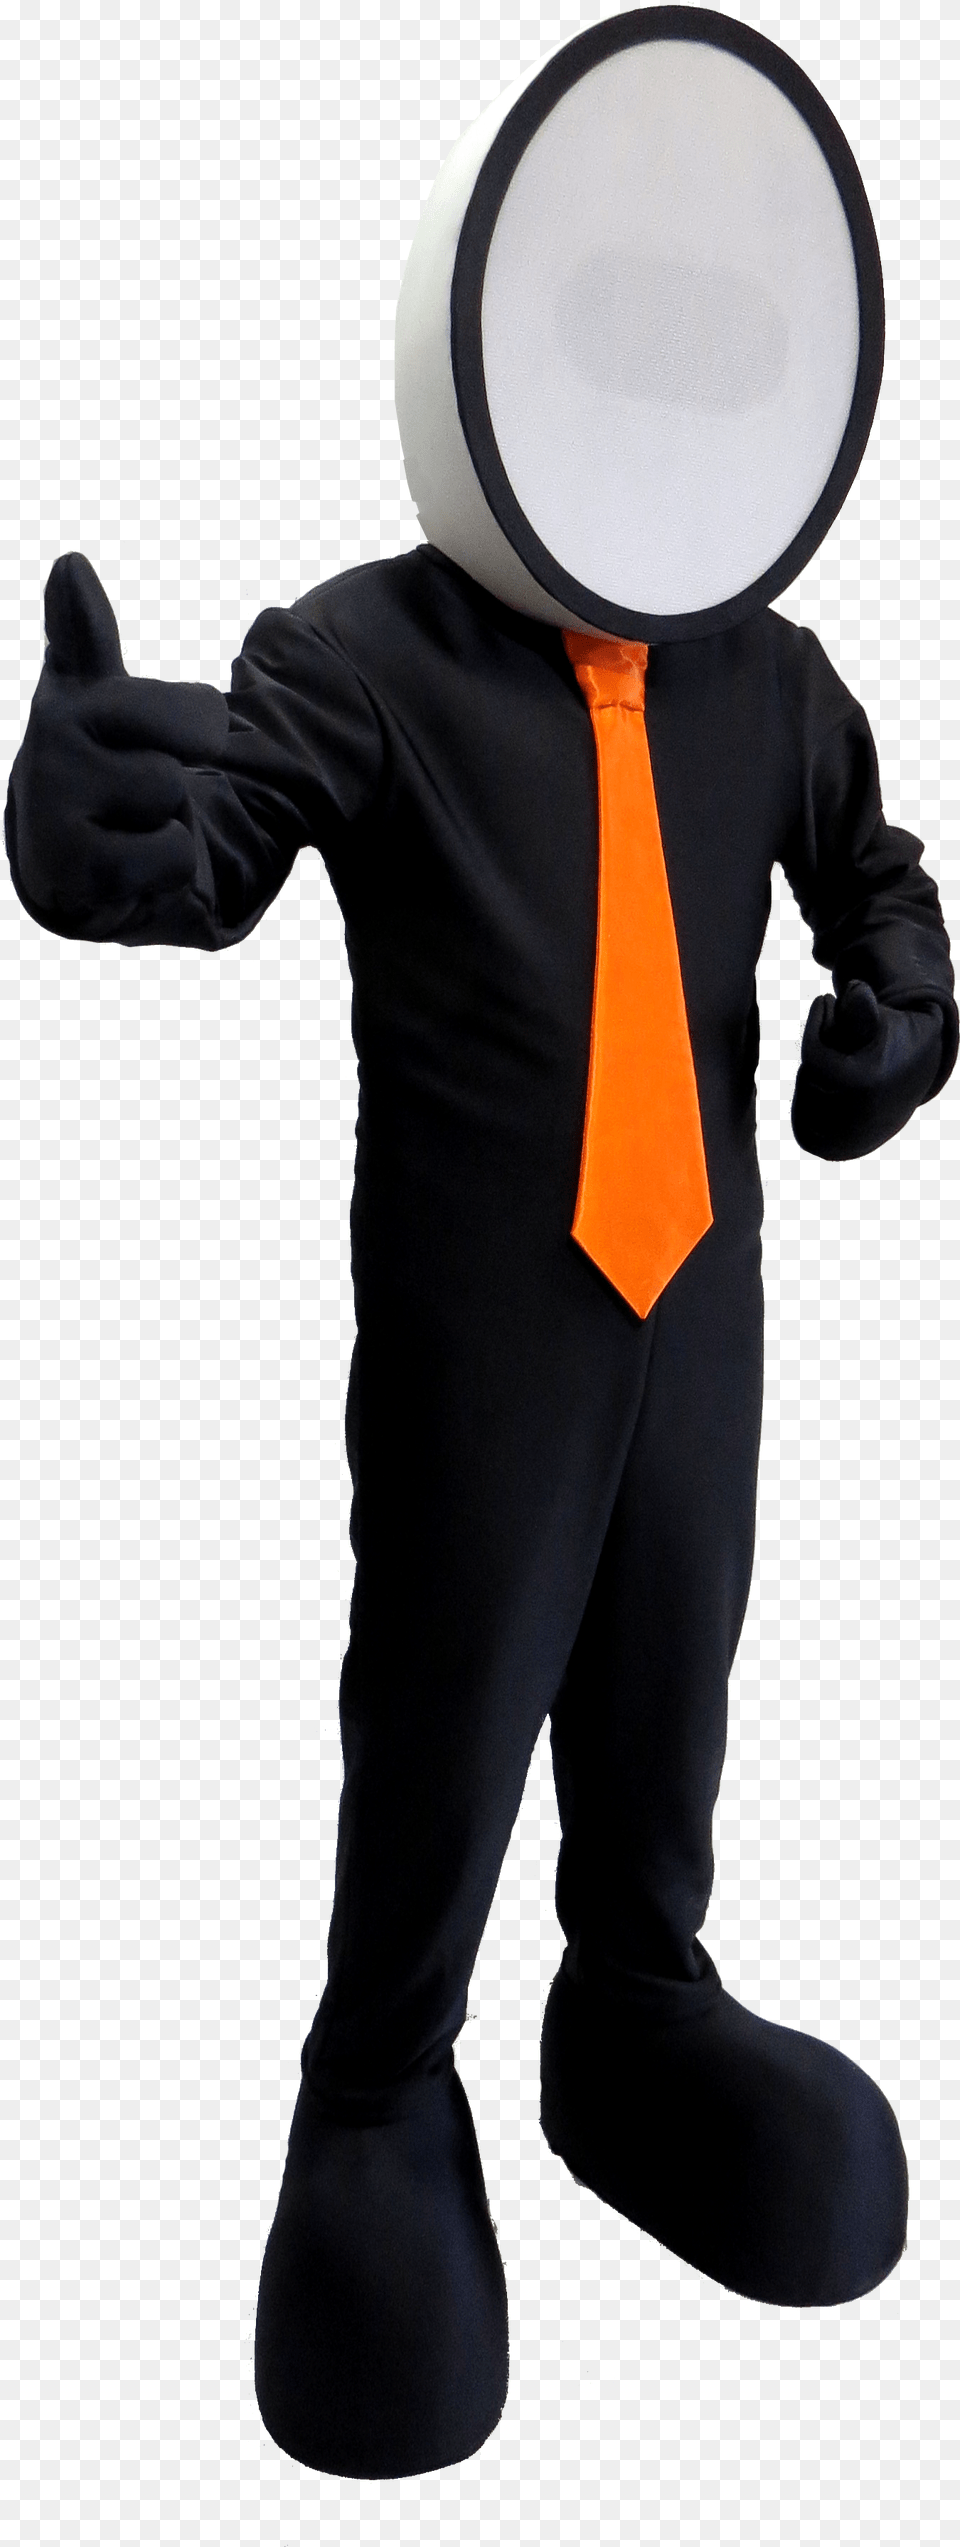 Norfolk Southern Wetsuit, Accessories, Tie, Formal Wear, Photography Free Transparent Png